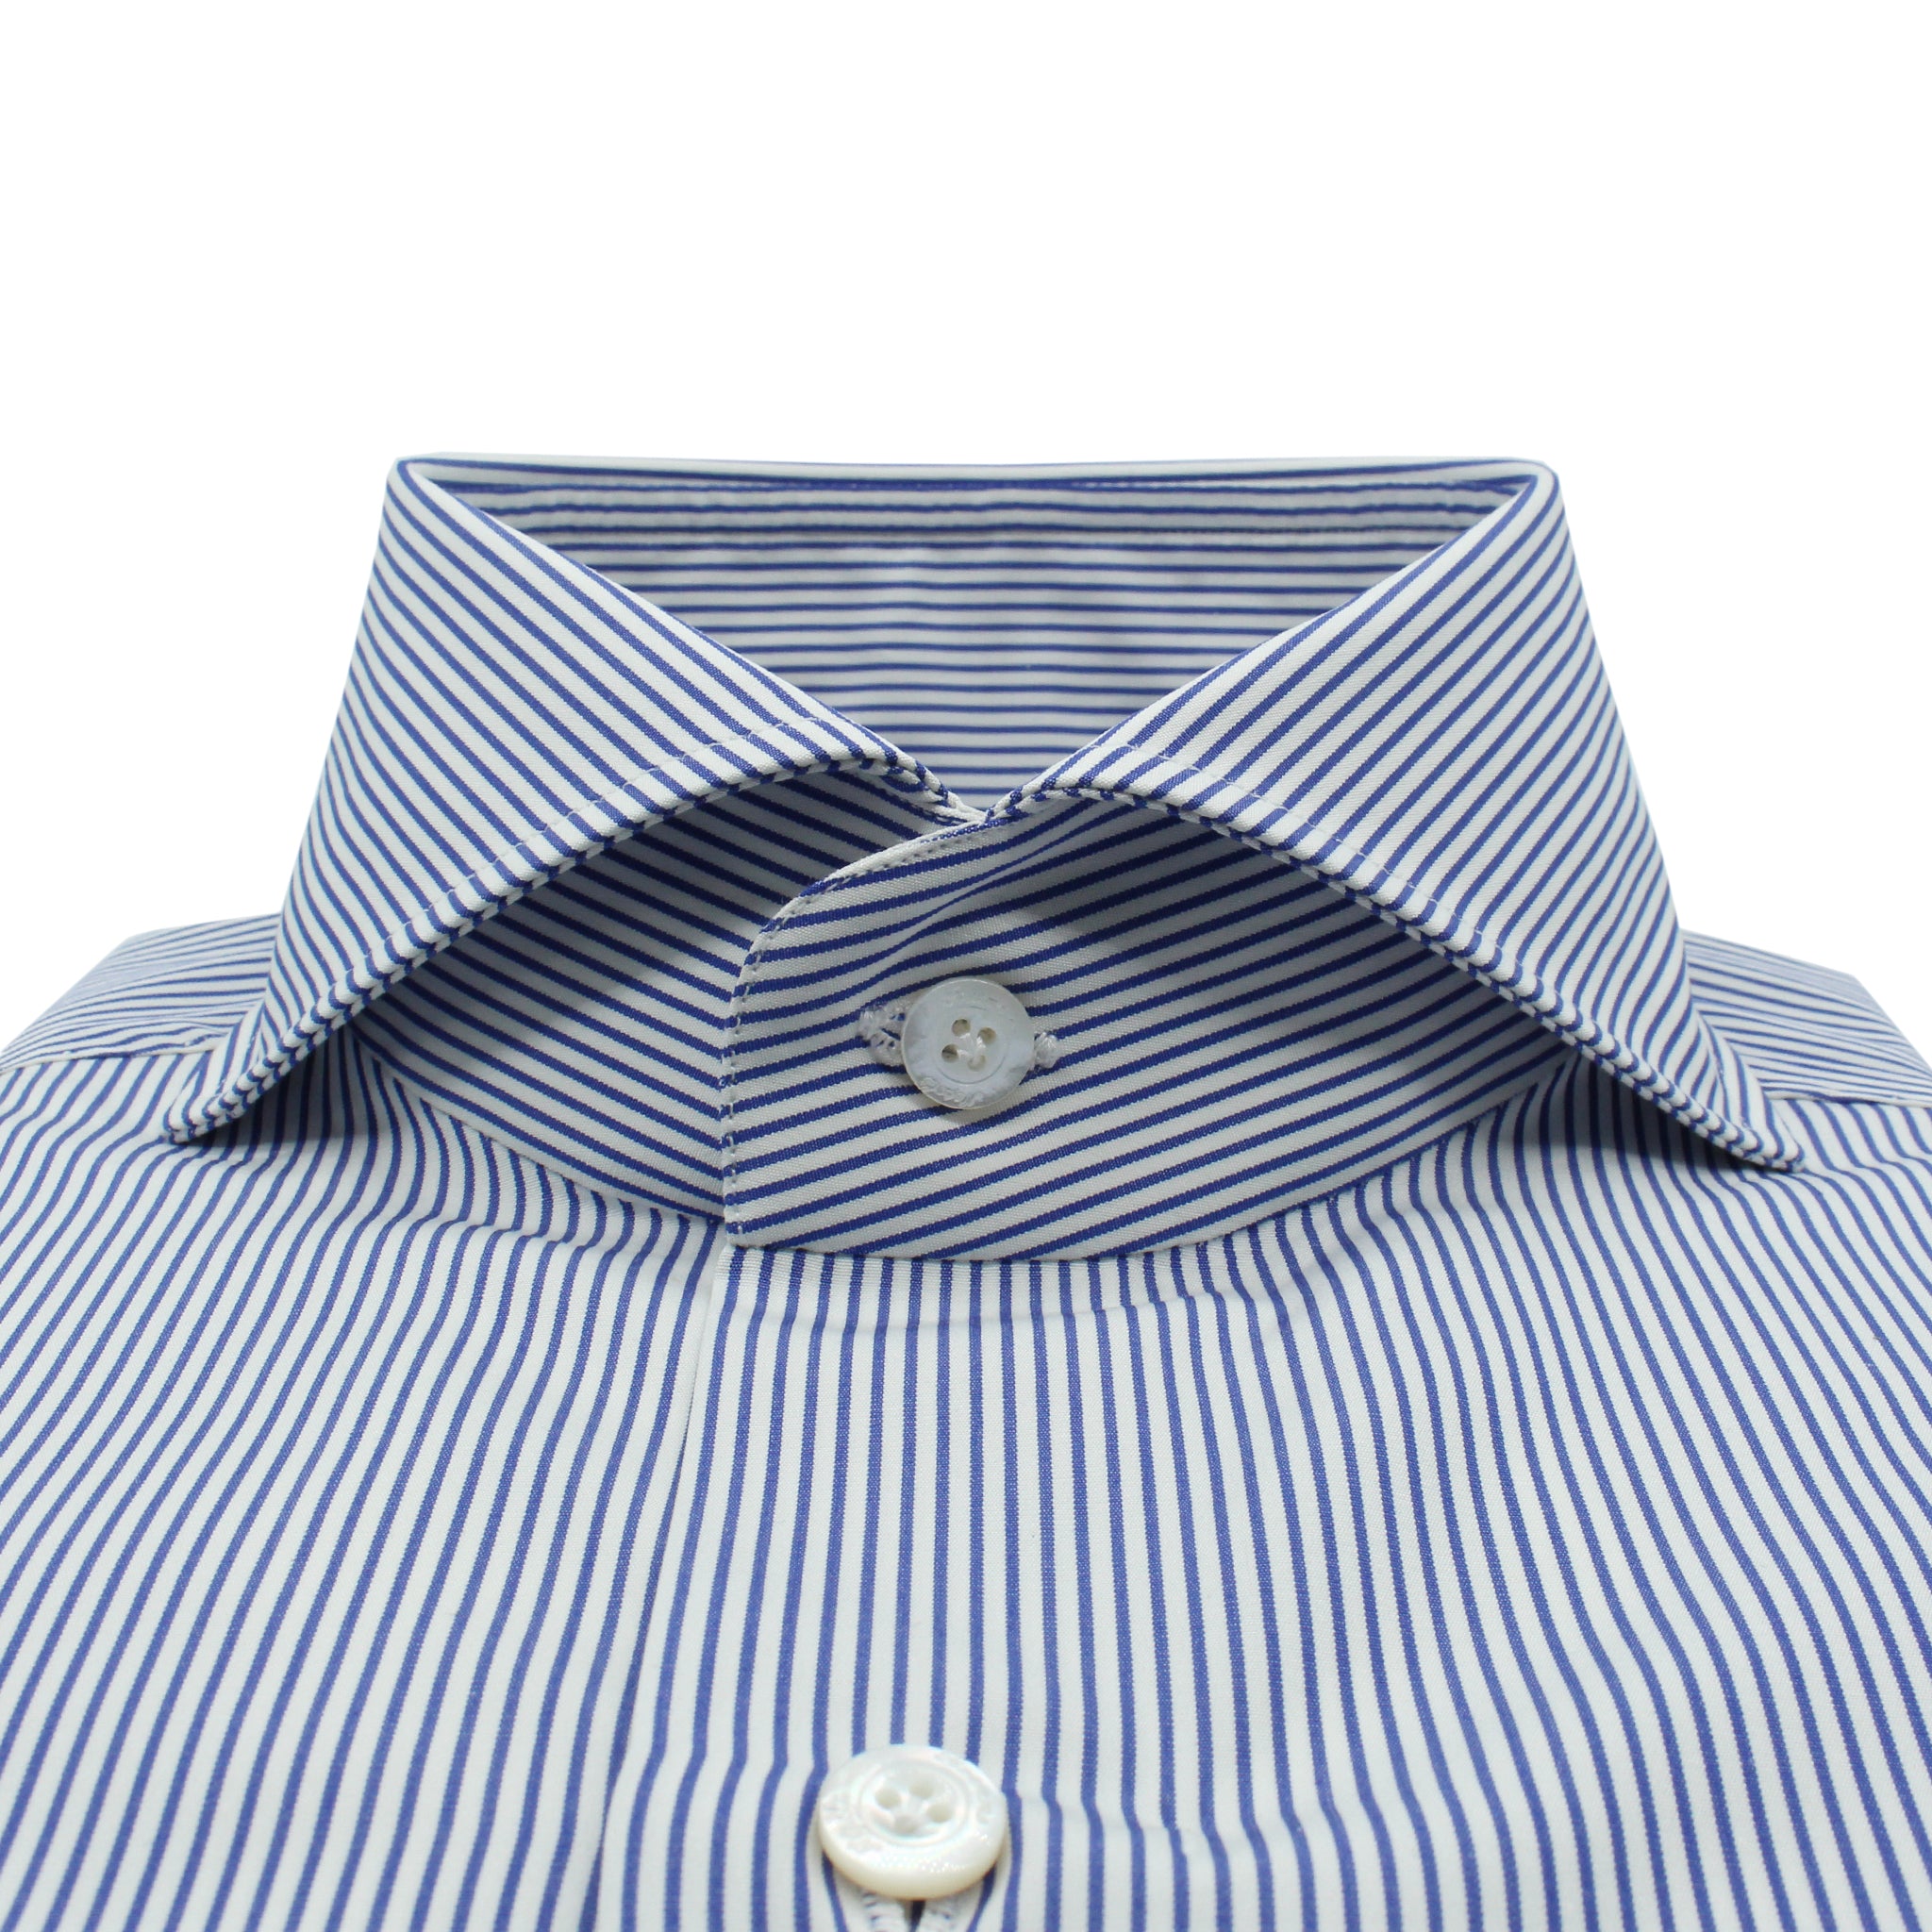 Naples classic fit shirt in blue striped cotton